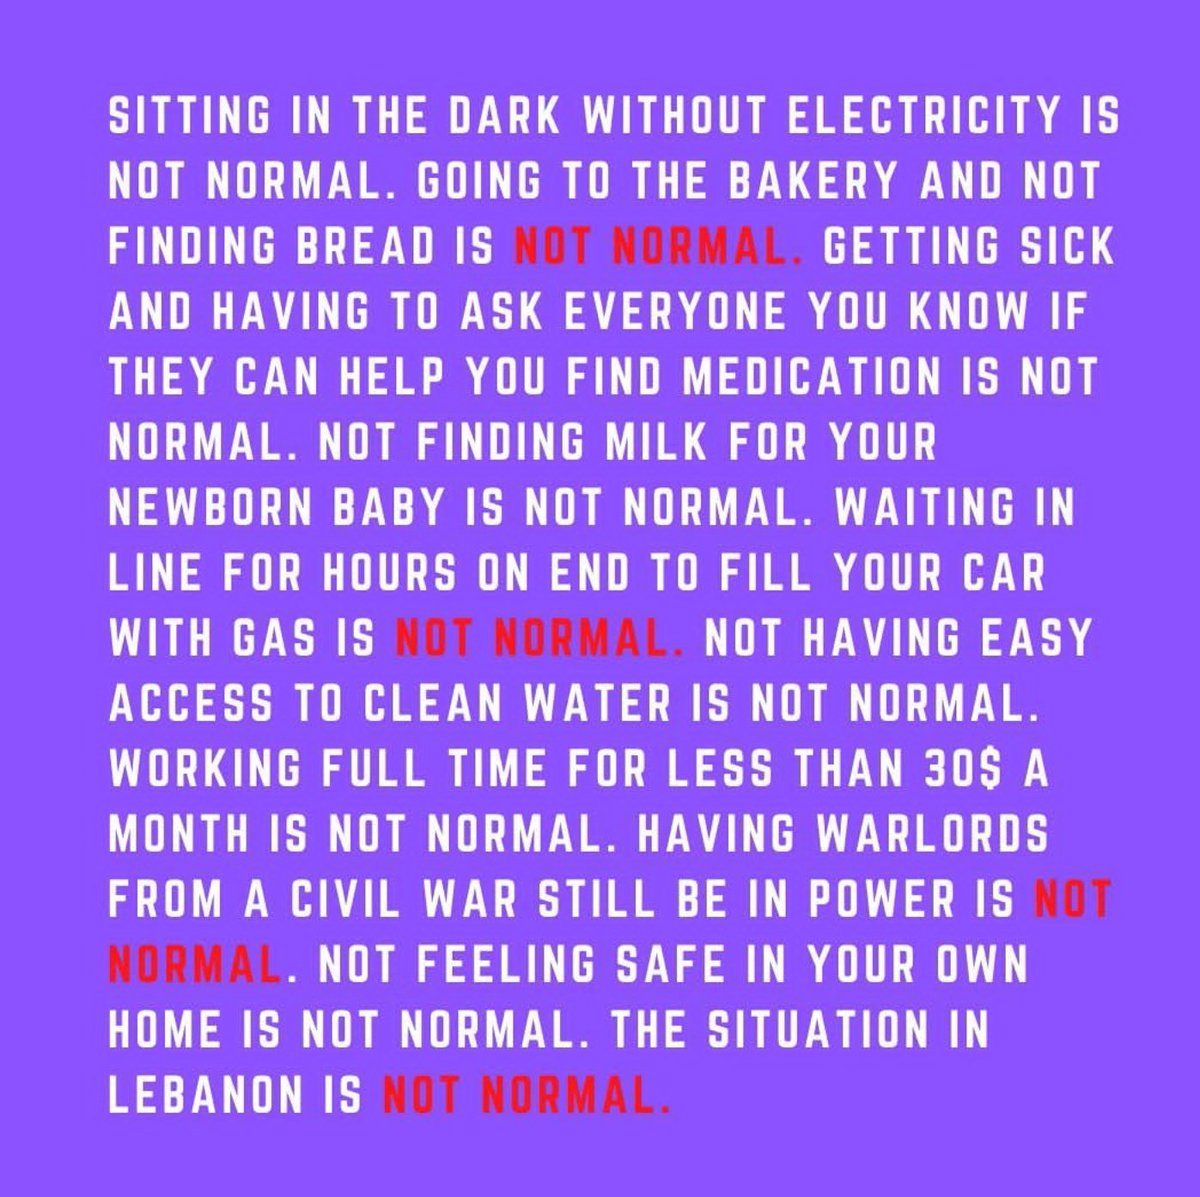 All of this is abnormal! We shouldn't adapt to this new reality! Let the world know how much we are struggling to live!!
#Lebanon
#PrayForLebanon